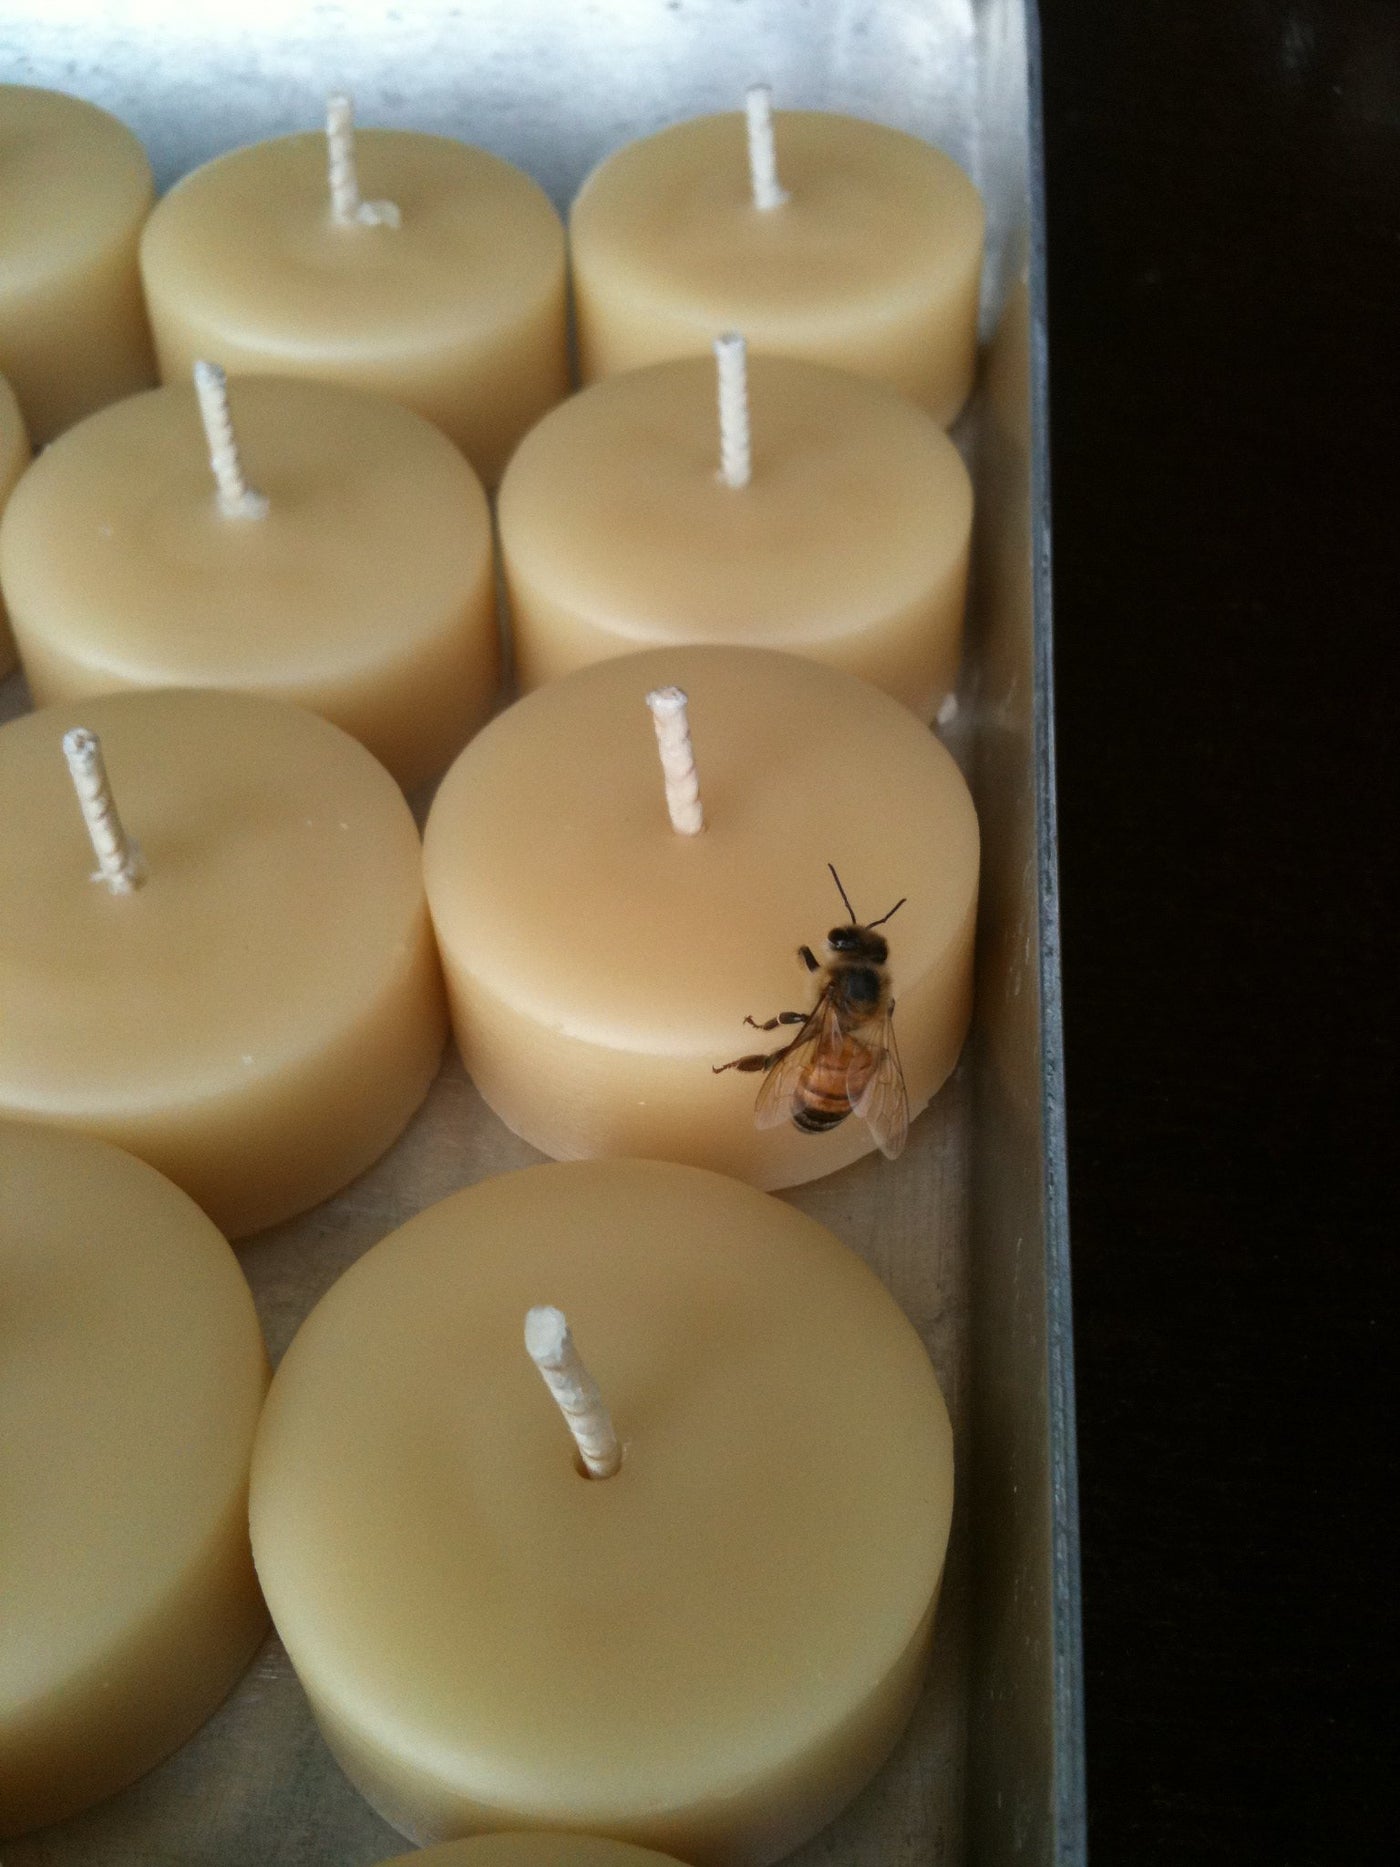 Queen B candles - 100% Pure Beeswax - as certified by the bees!